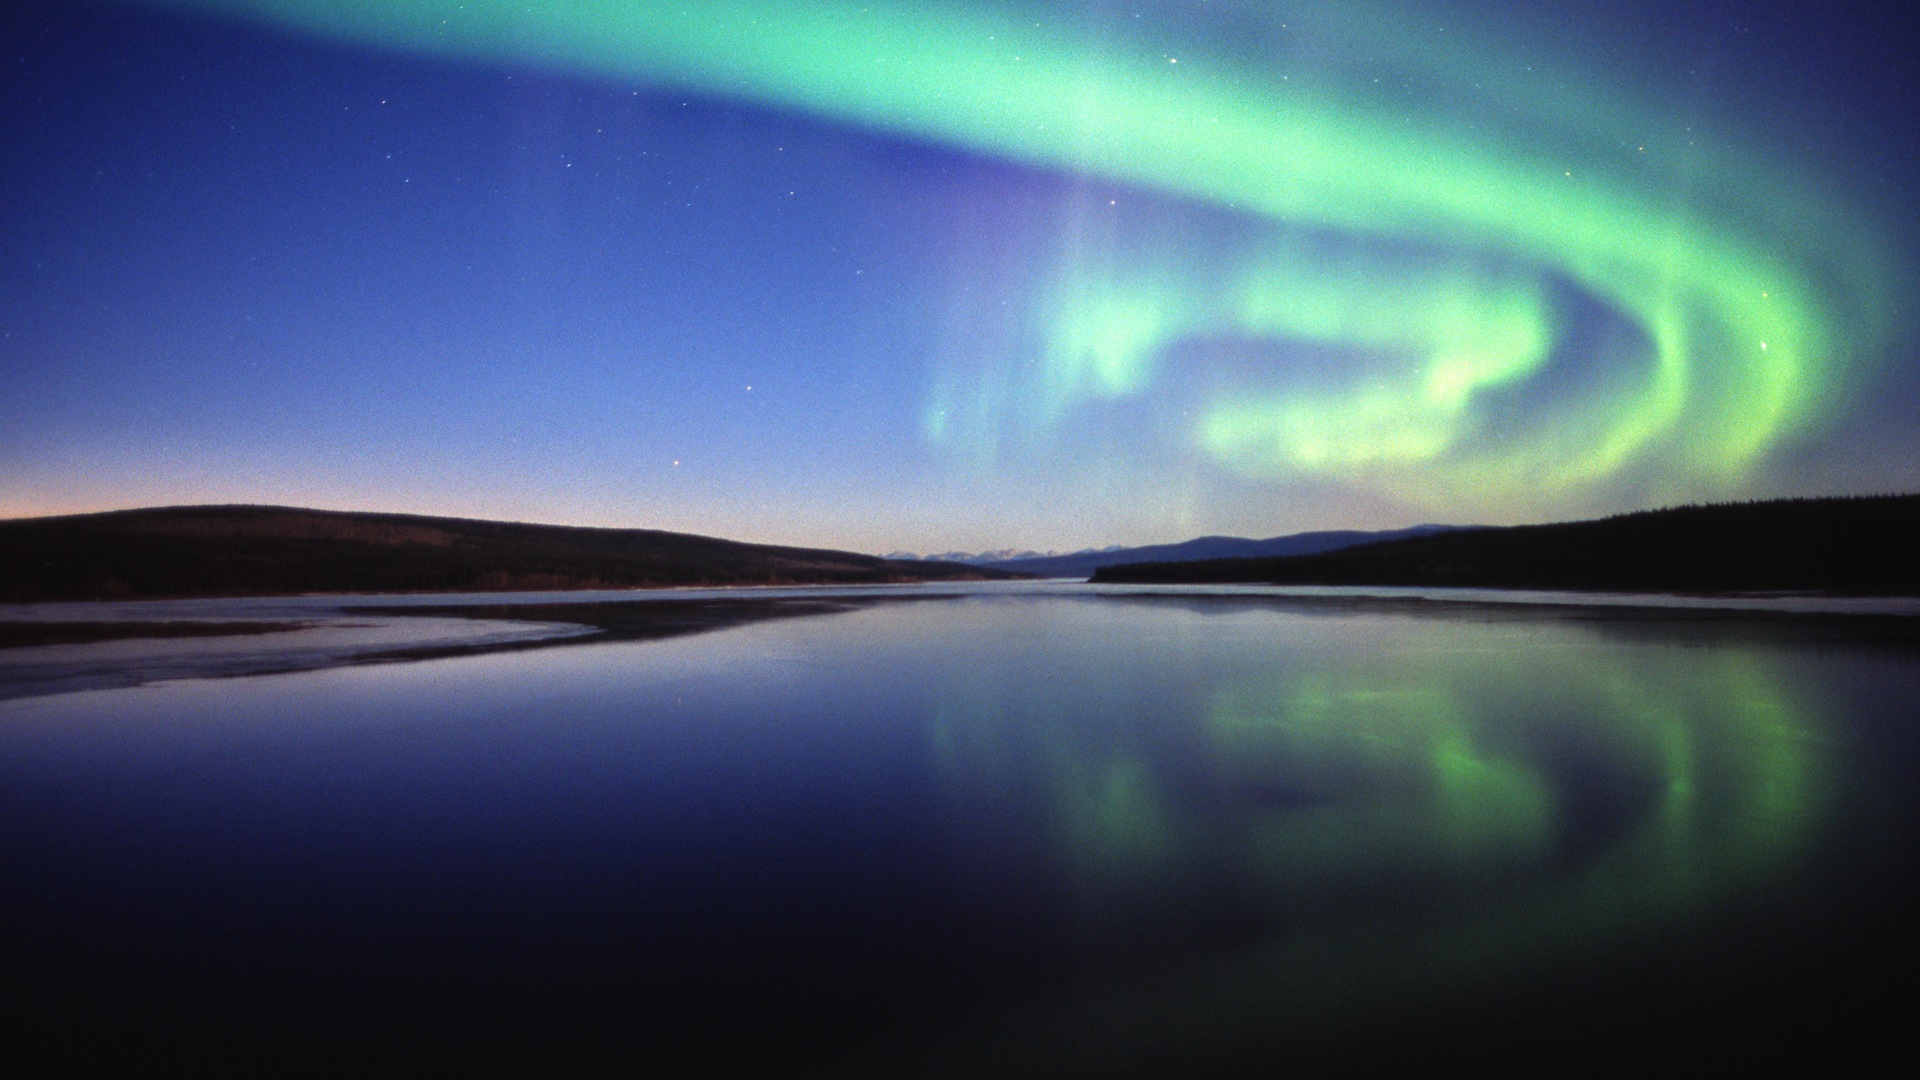 Natural wonders of the Northern Lights HD Wallpaper (2) #15 - 1920x1080